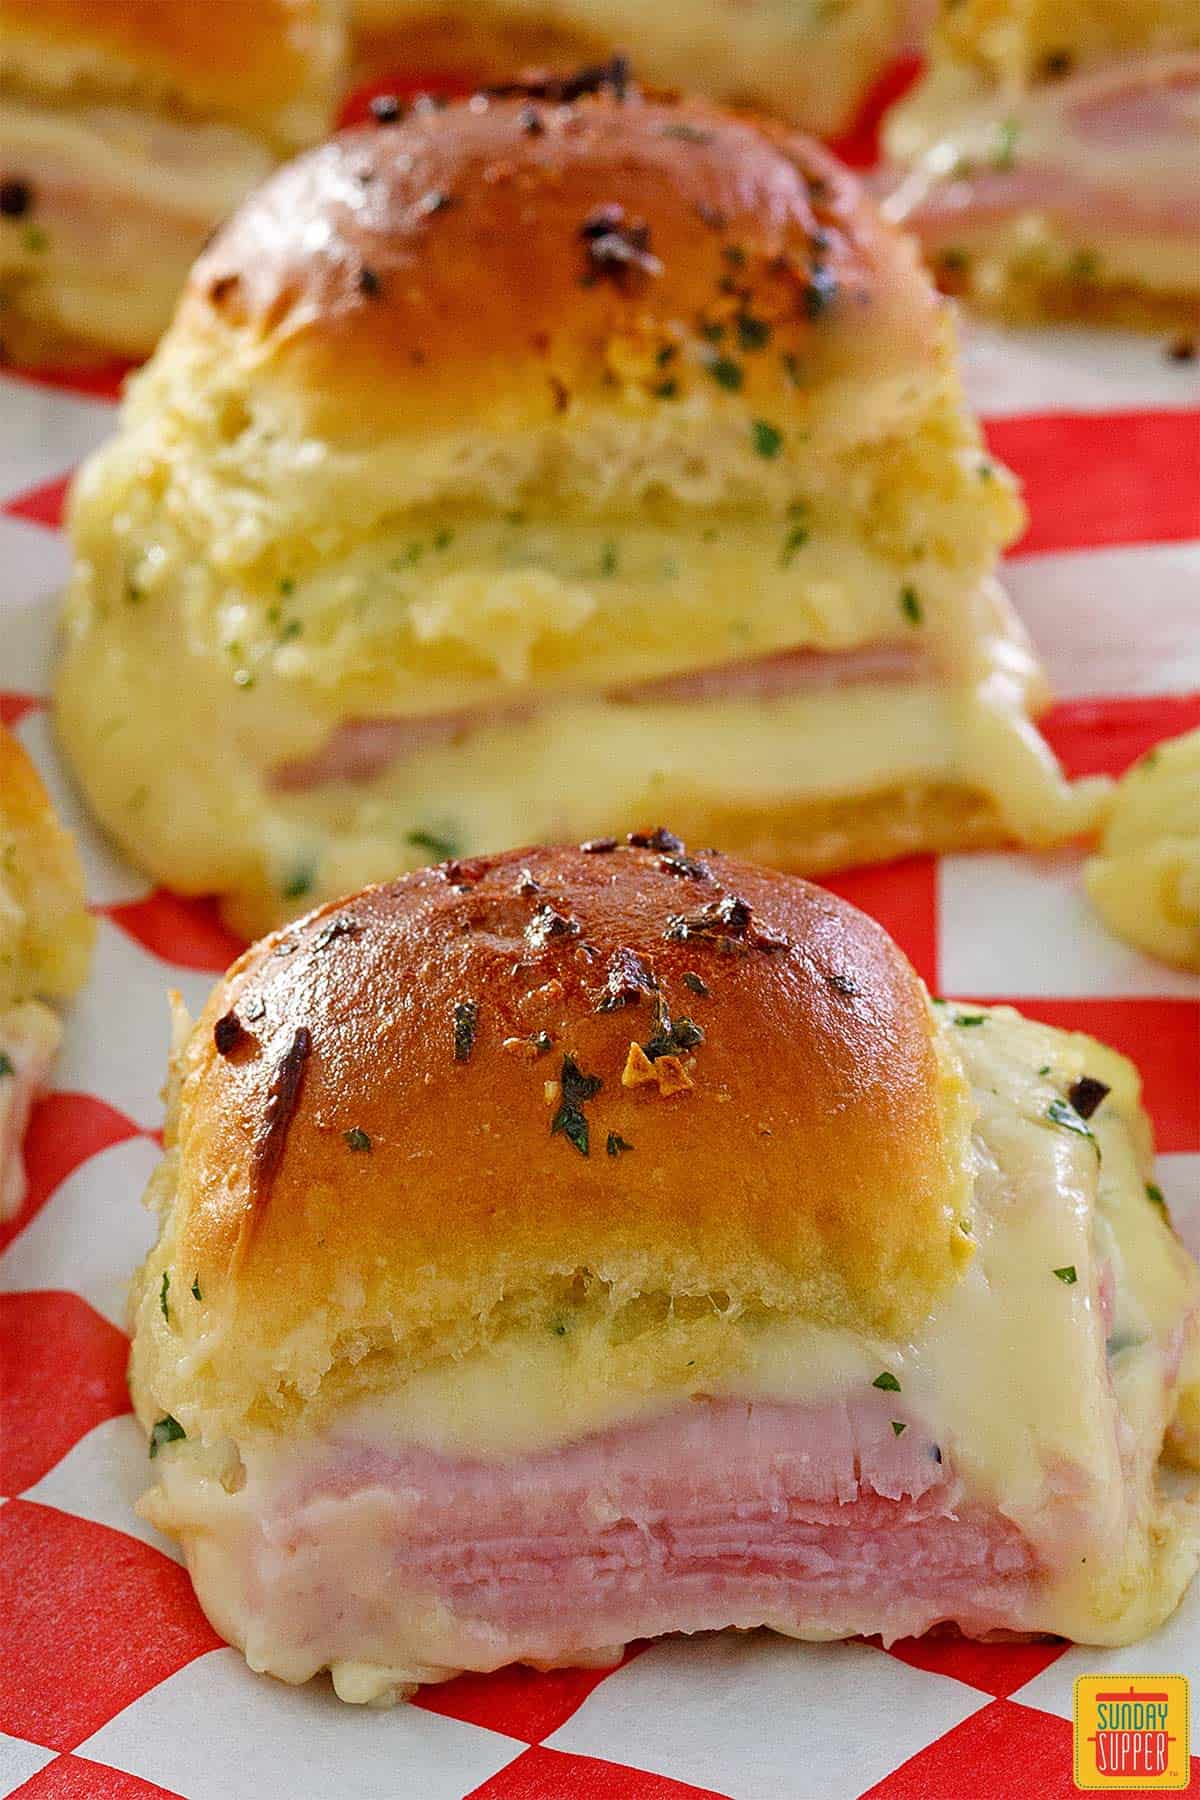 Two ham and cheese sliders on red and white checked paper